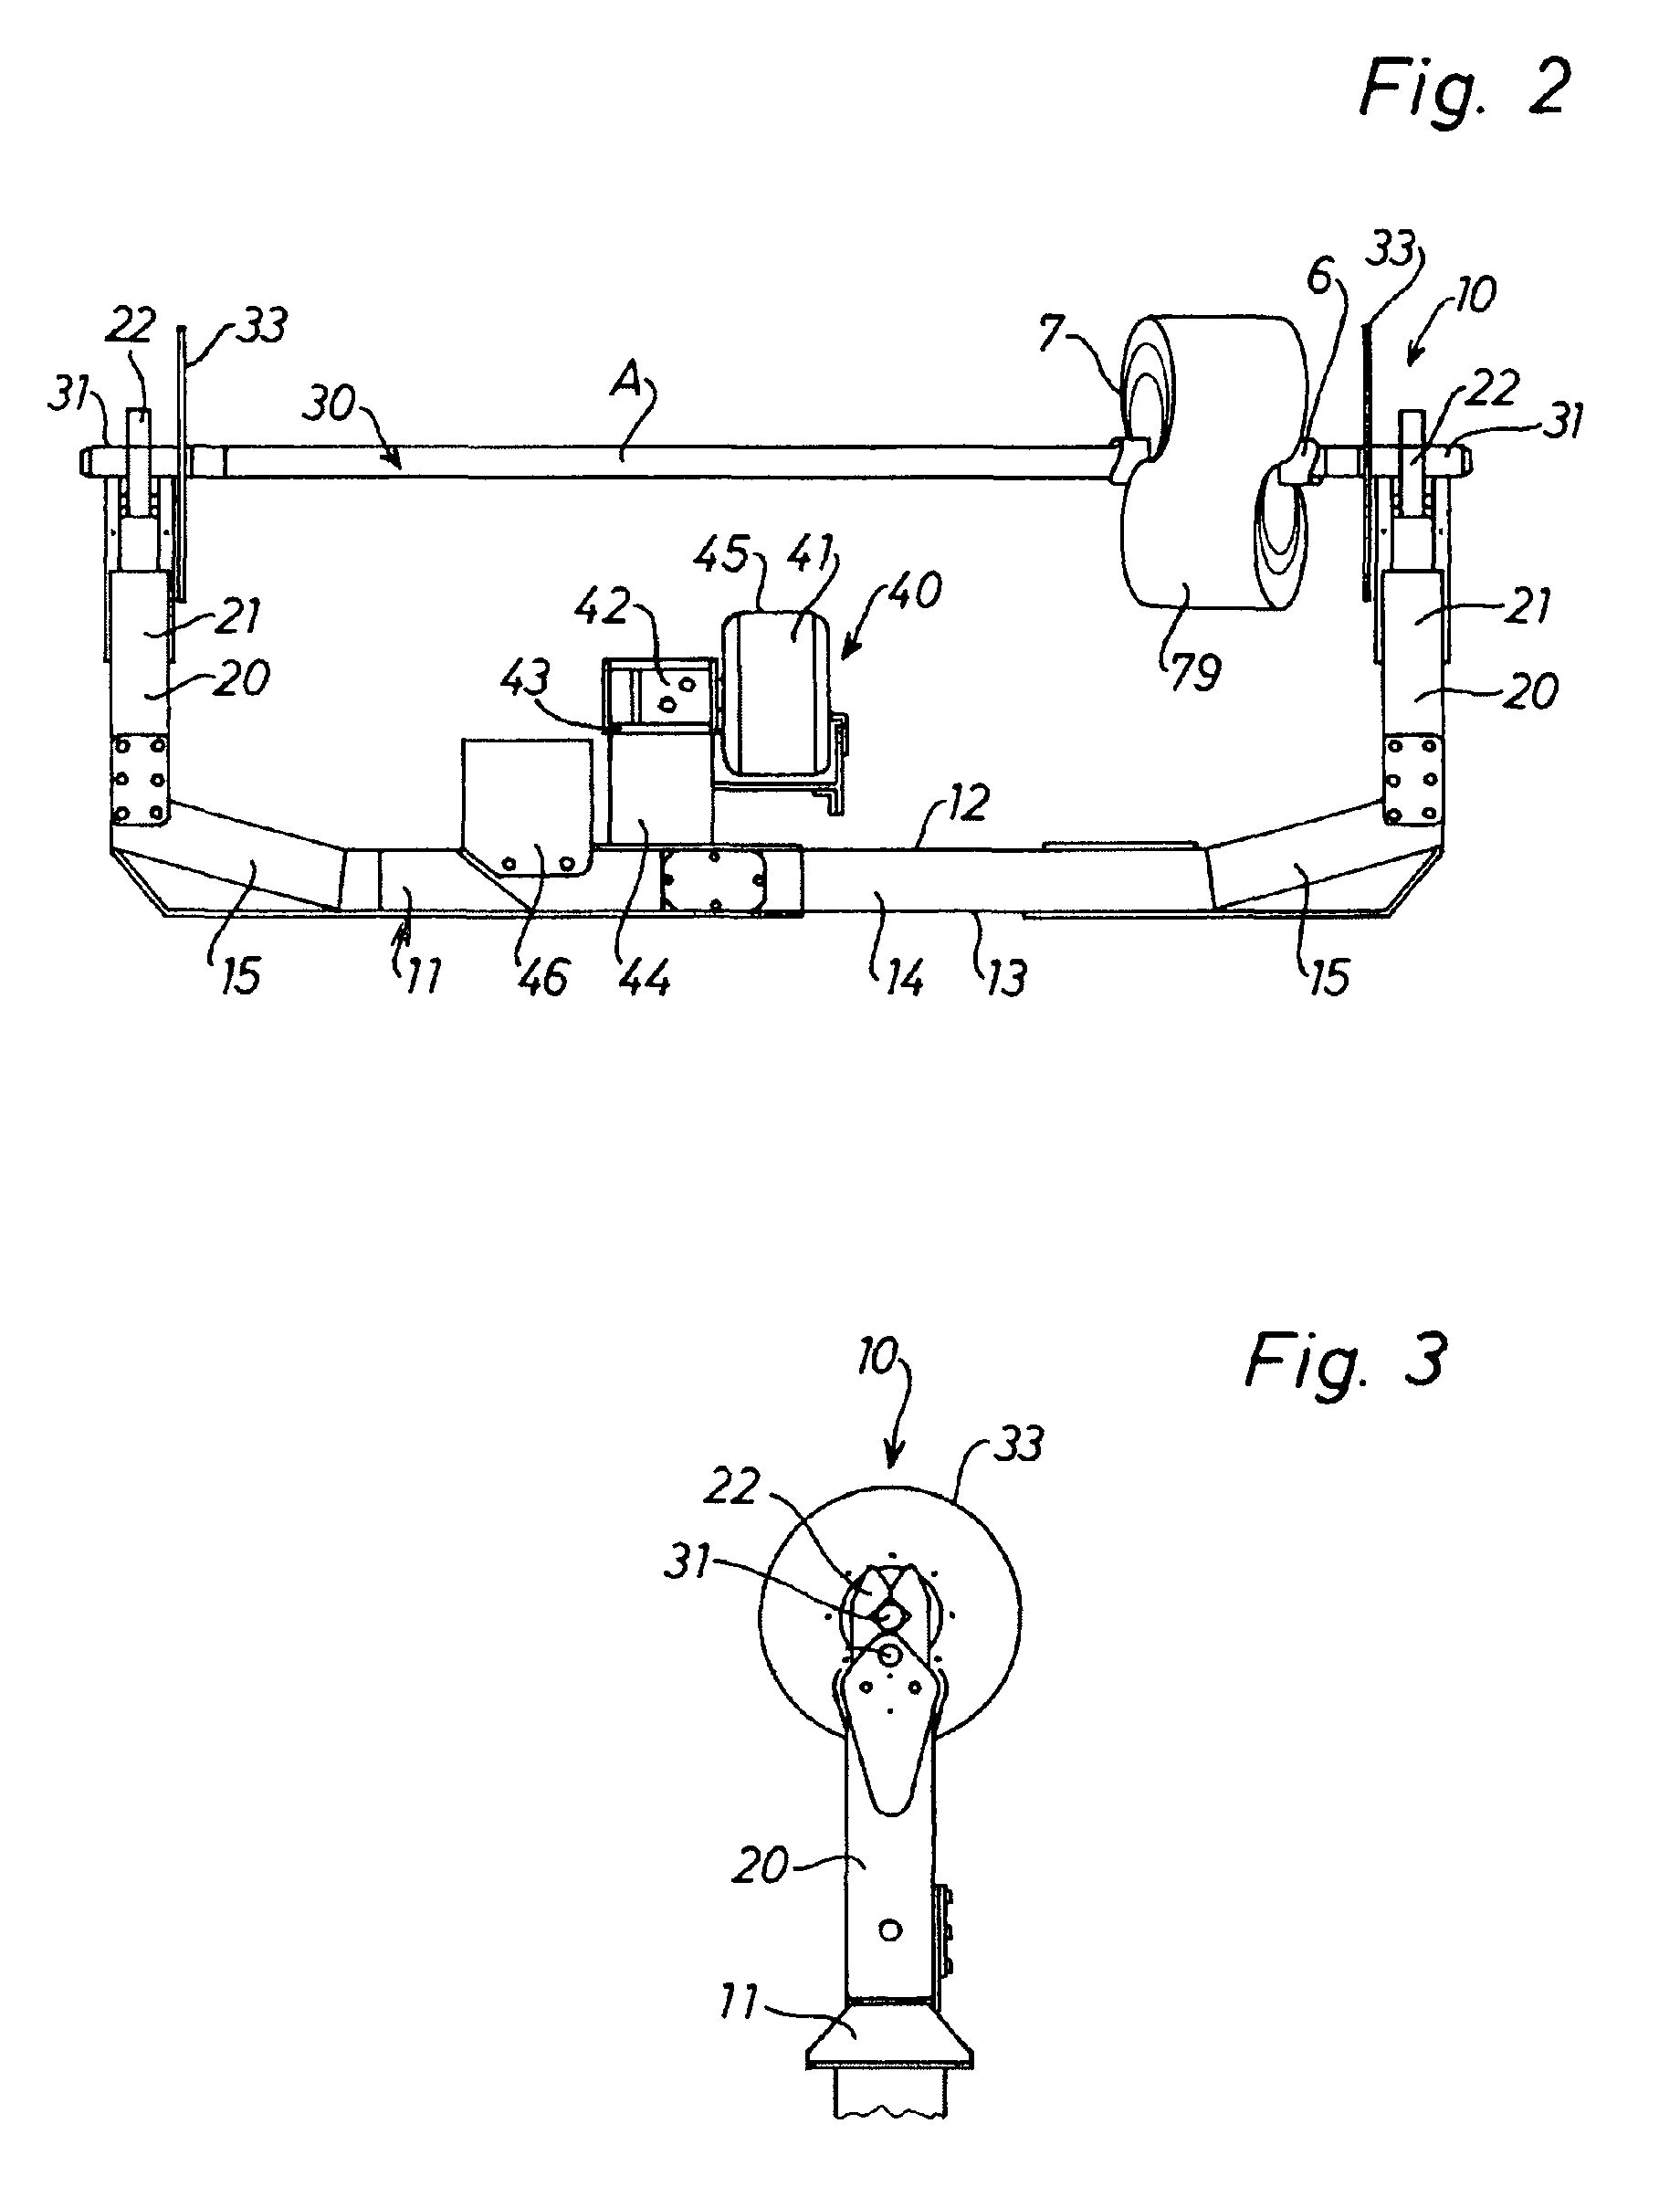 Method and apparatus for lining tunnel walls or tunnel ceilings with protective nets